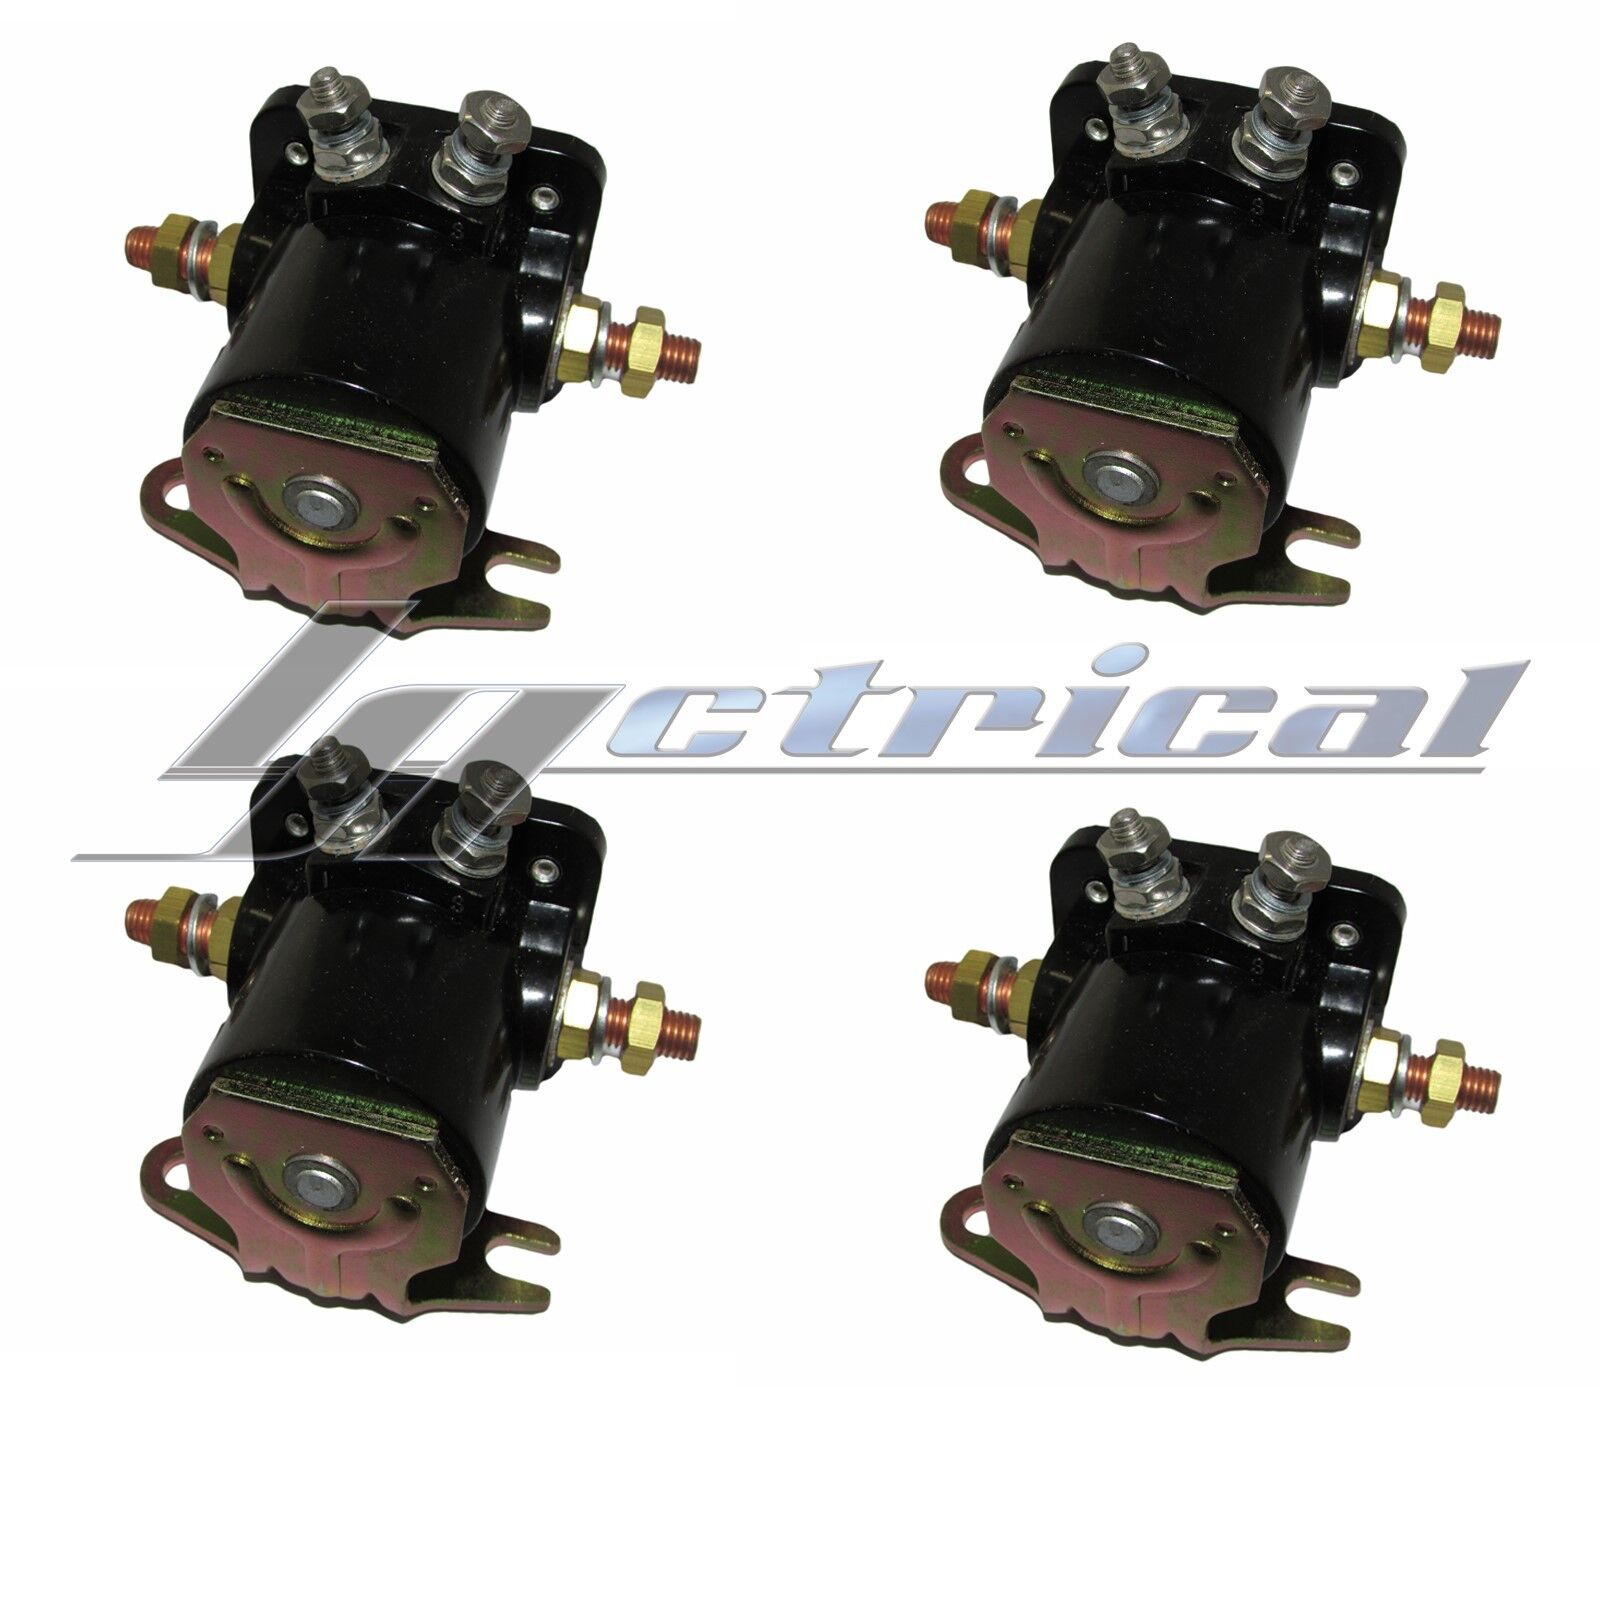 FOUR (4) NEW WINCH SOLENOIDS SOLENOID RELAY Fits EARLY WARN MODELS XD9000i 9.5ti